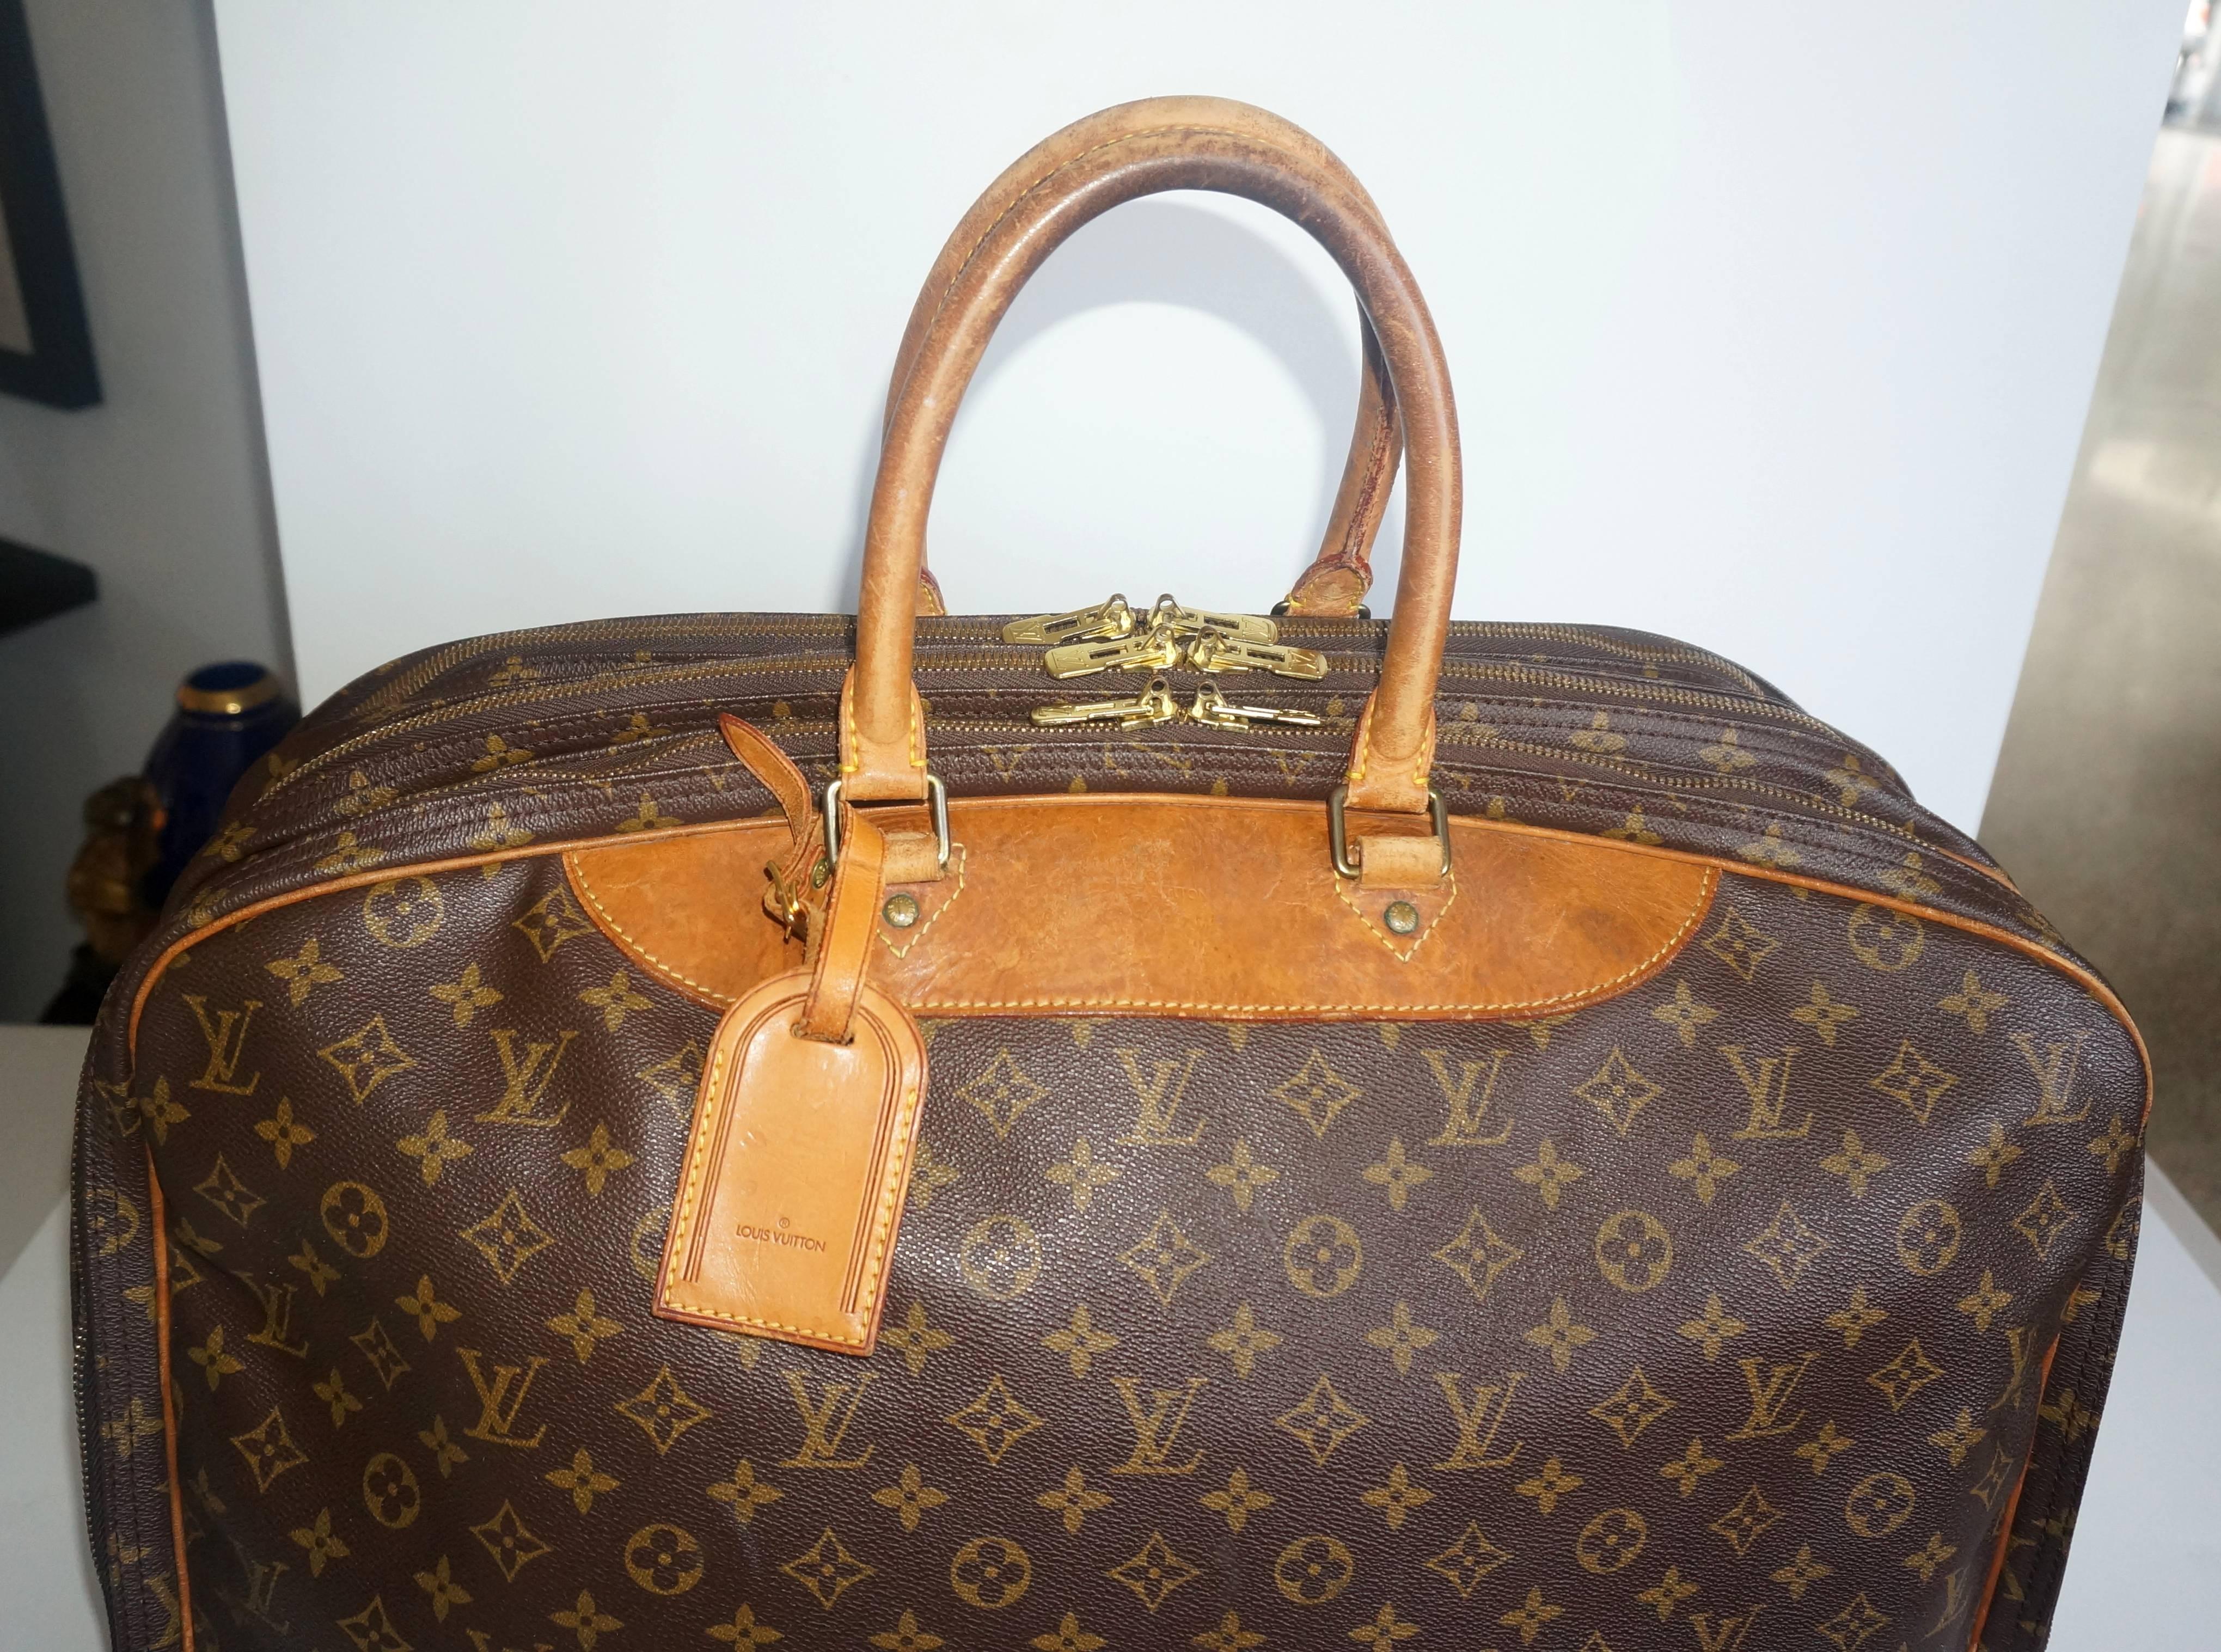 Classic, iconic and rare Louis Vuitton 